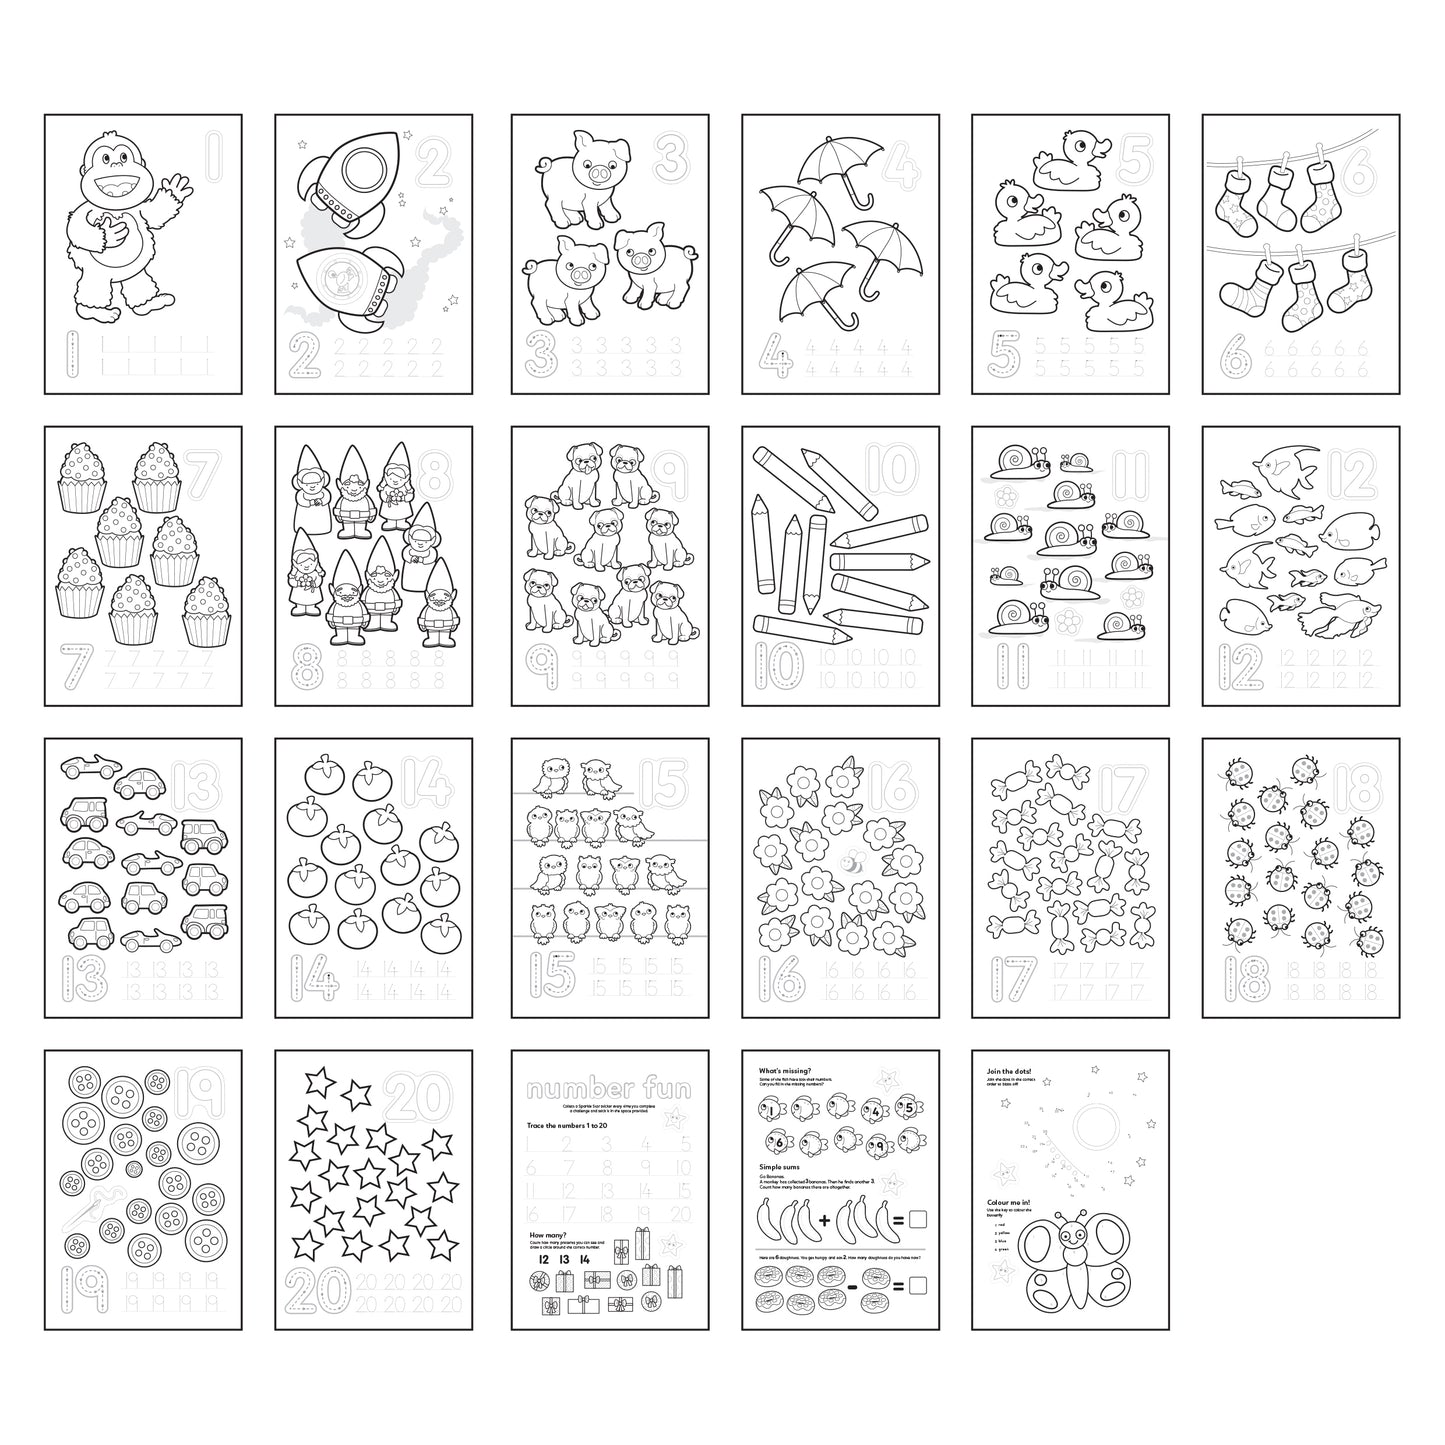 Orchard Toys 1-20 Colouring Book